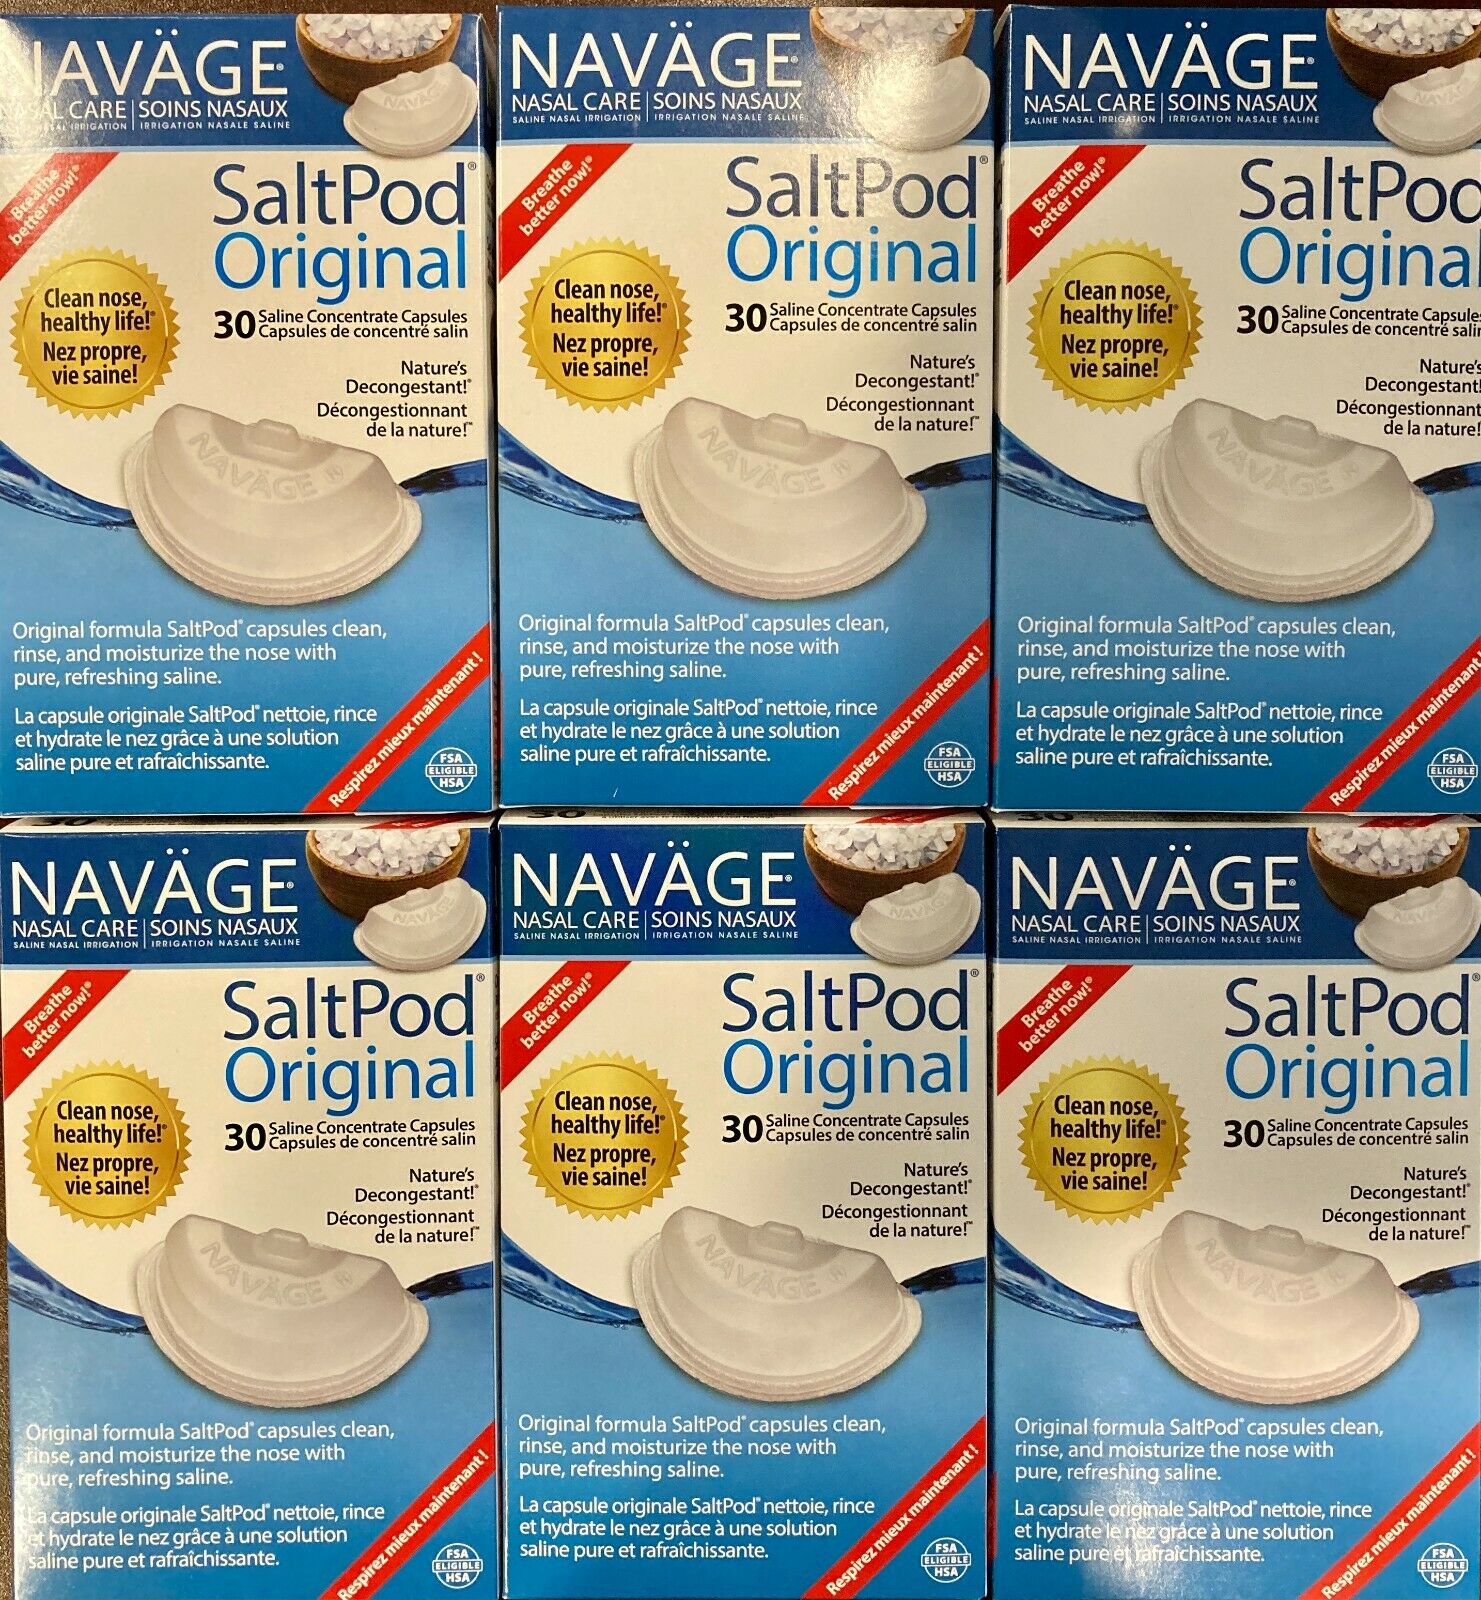 180 Factory Fresh Navage Salt Pods Use in the Navage Nasal System